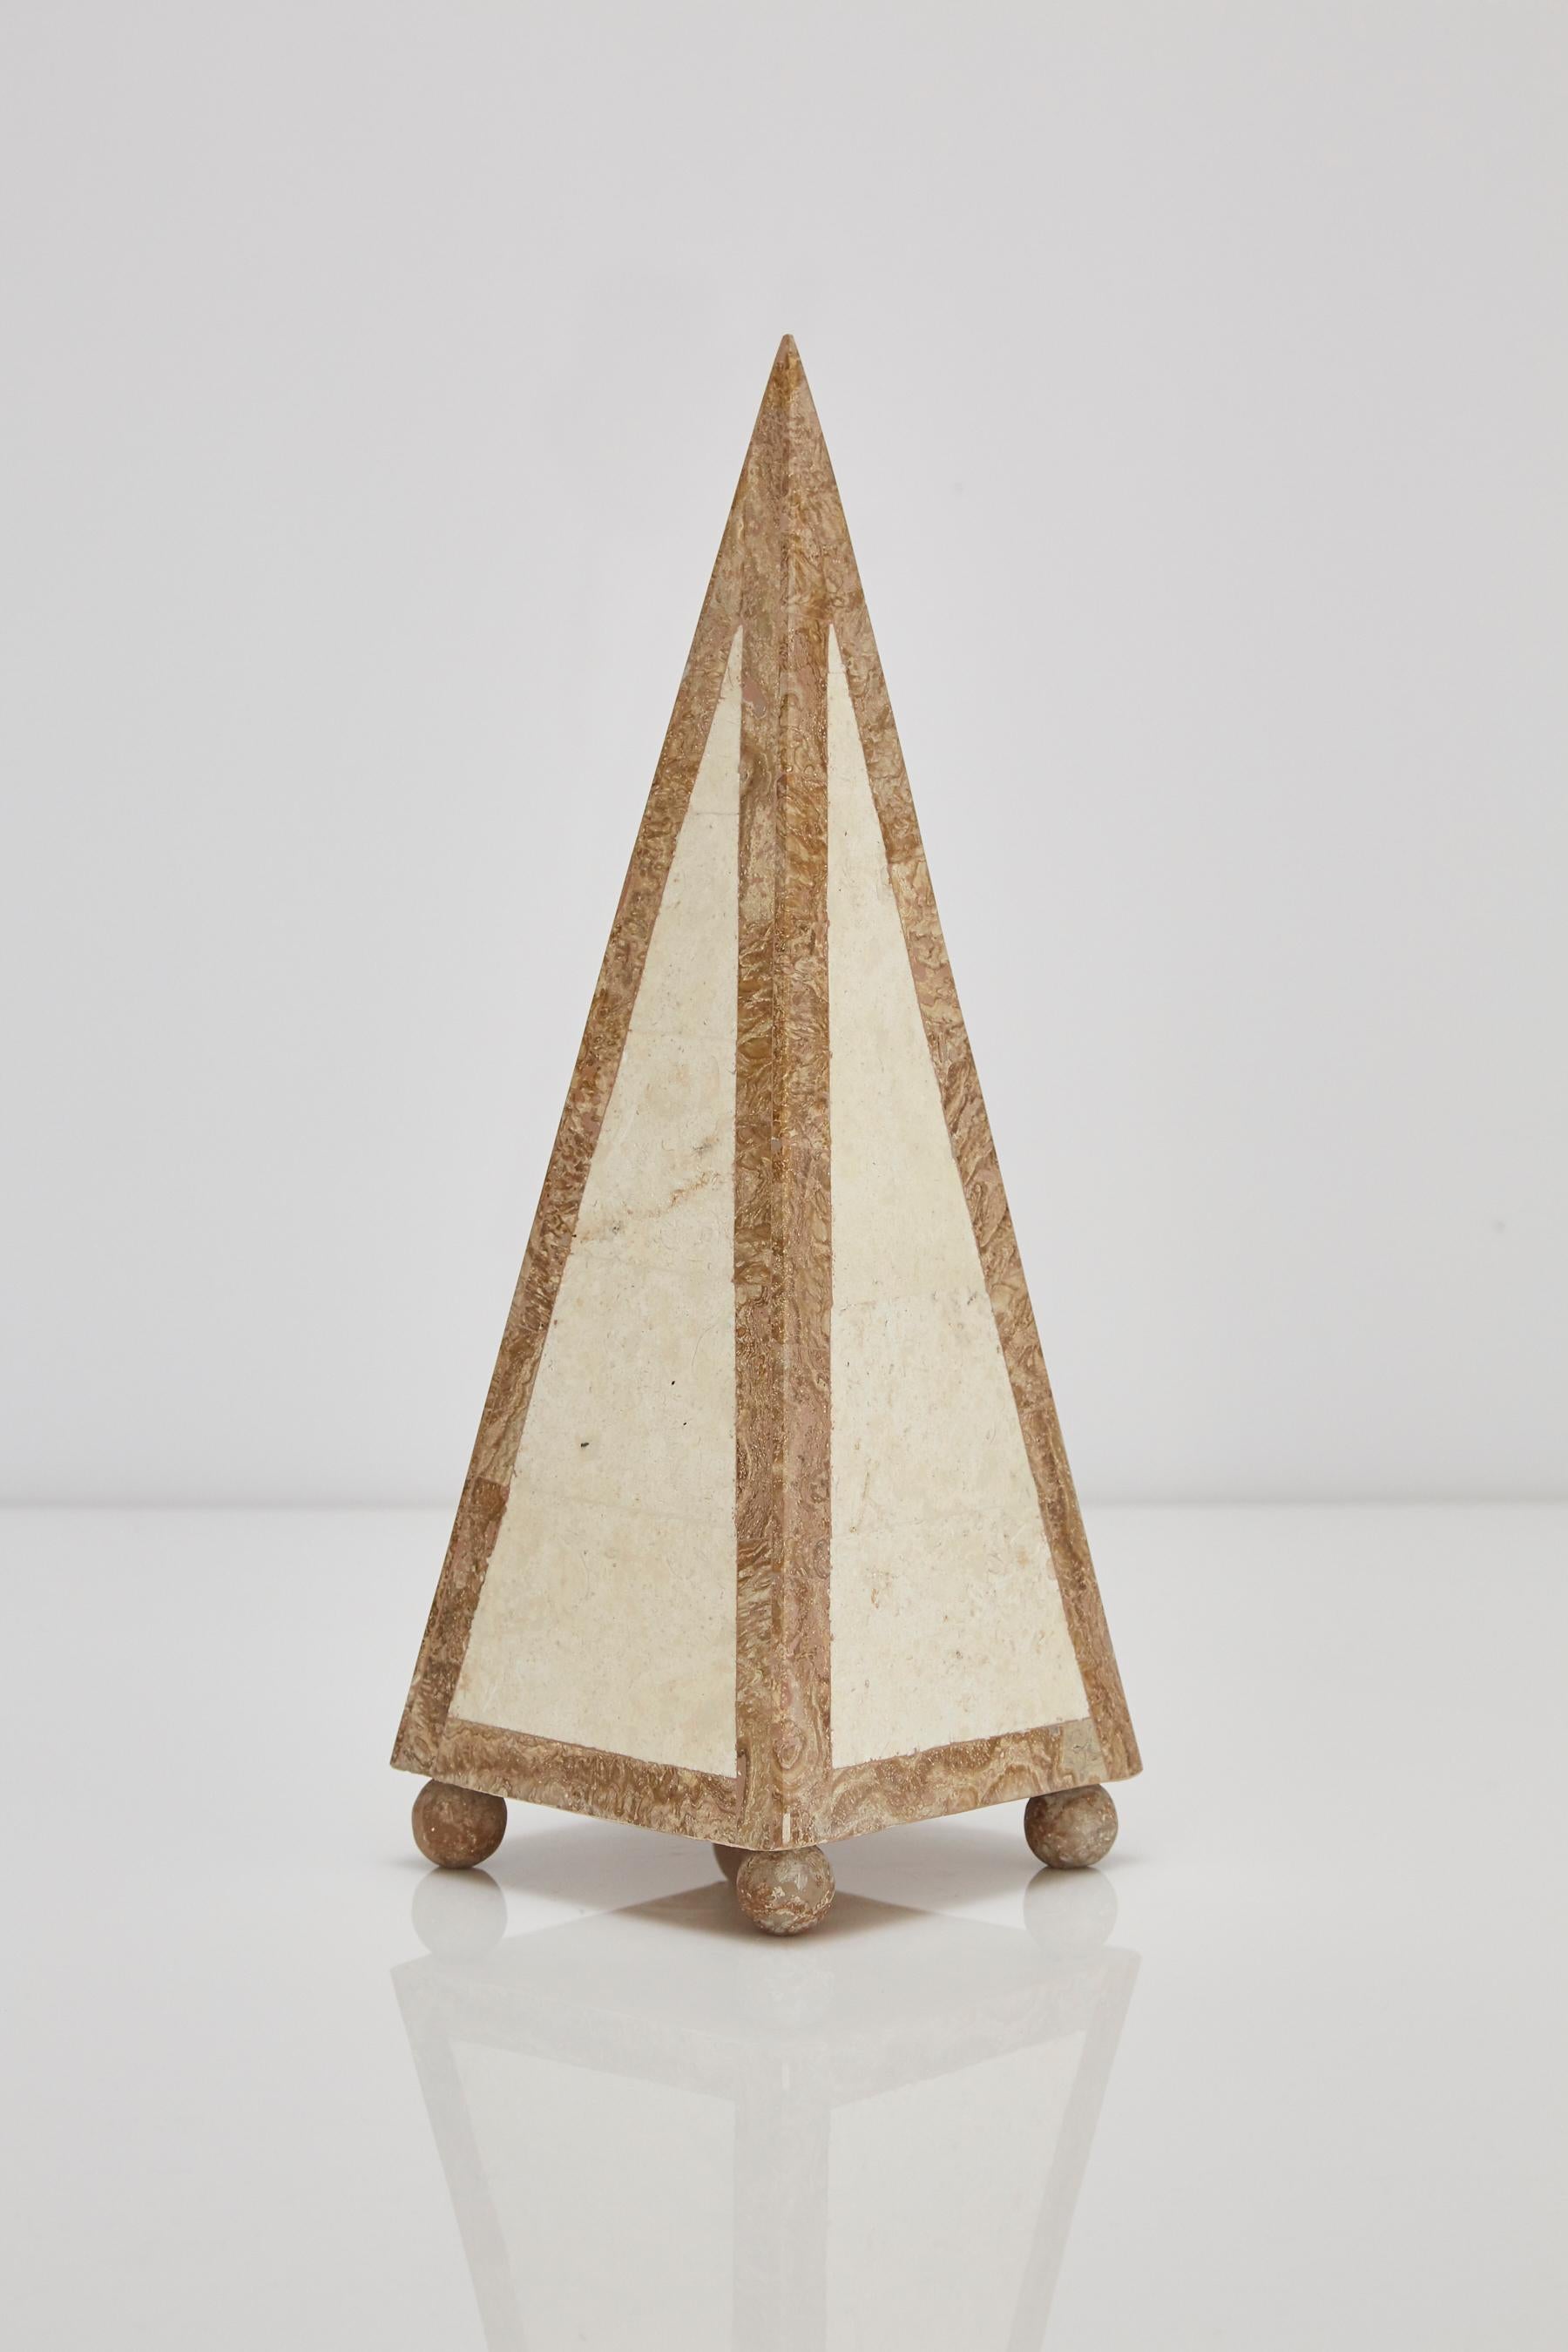 Post-Modern 15 in. Tall Decorative Tessellated Stone Pyramid, 1990s For Sale